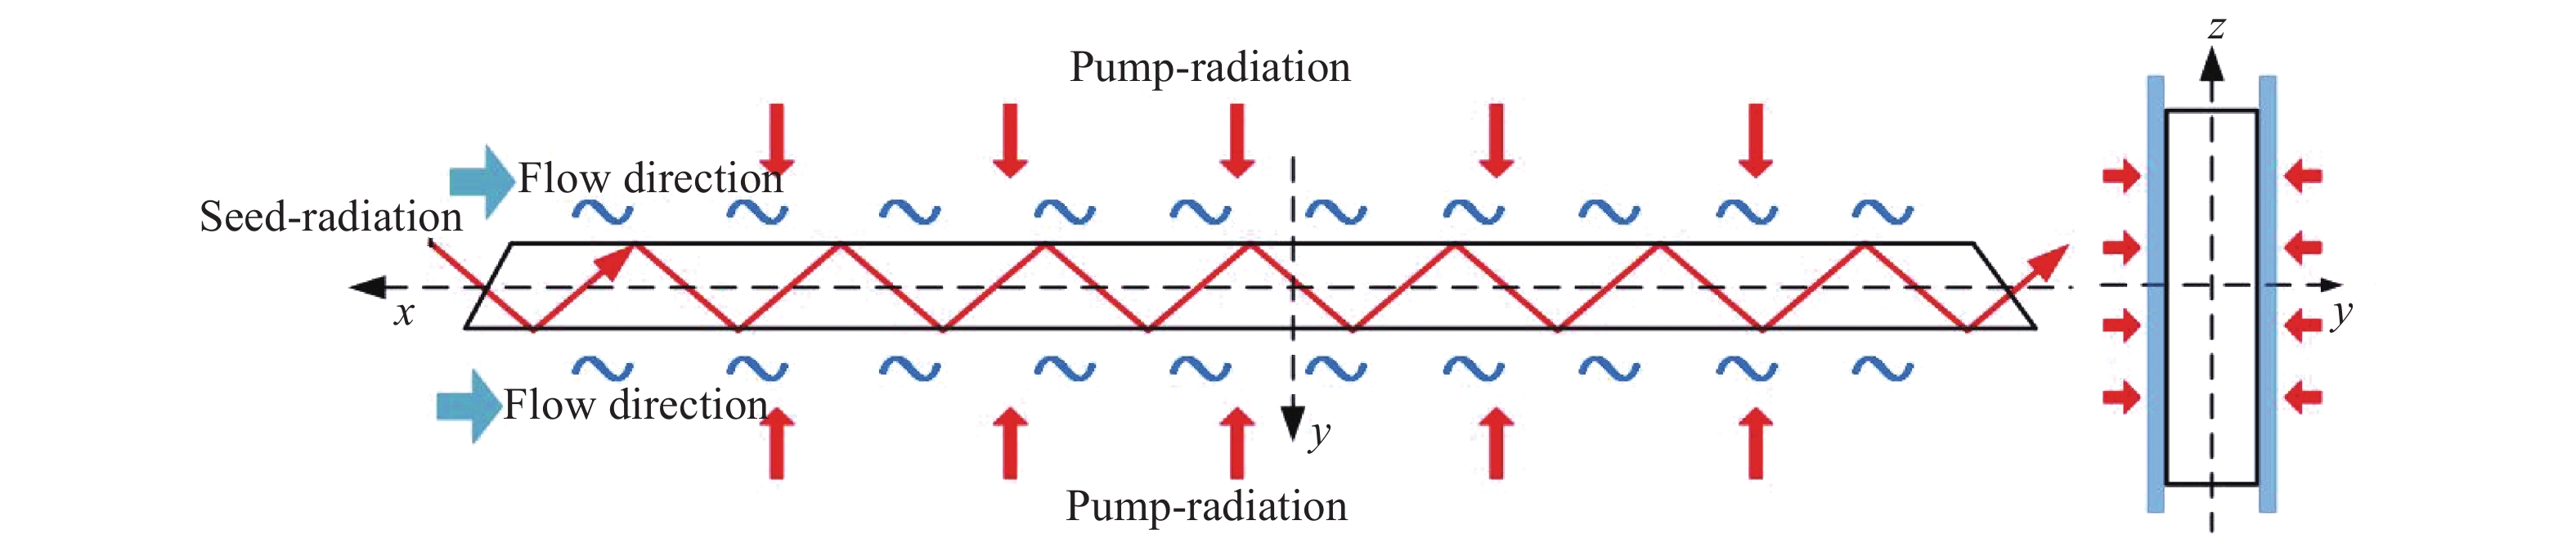 Side-faces even pumping and cooling schematic for slab amplifer